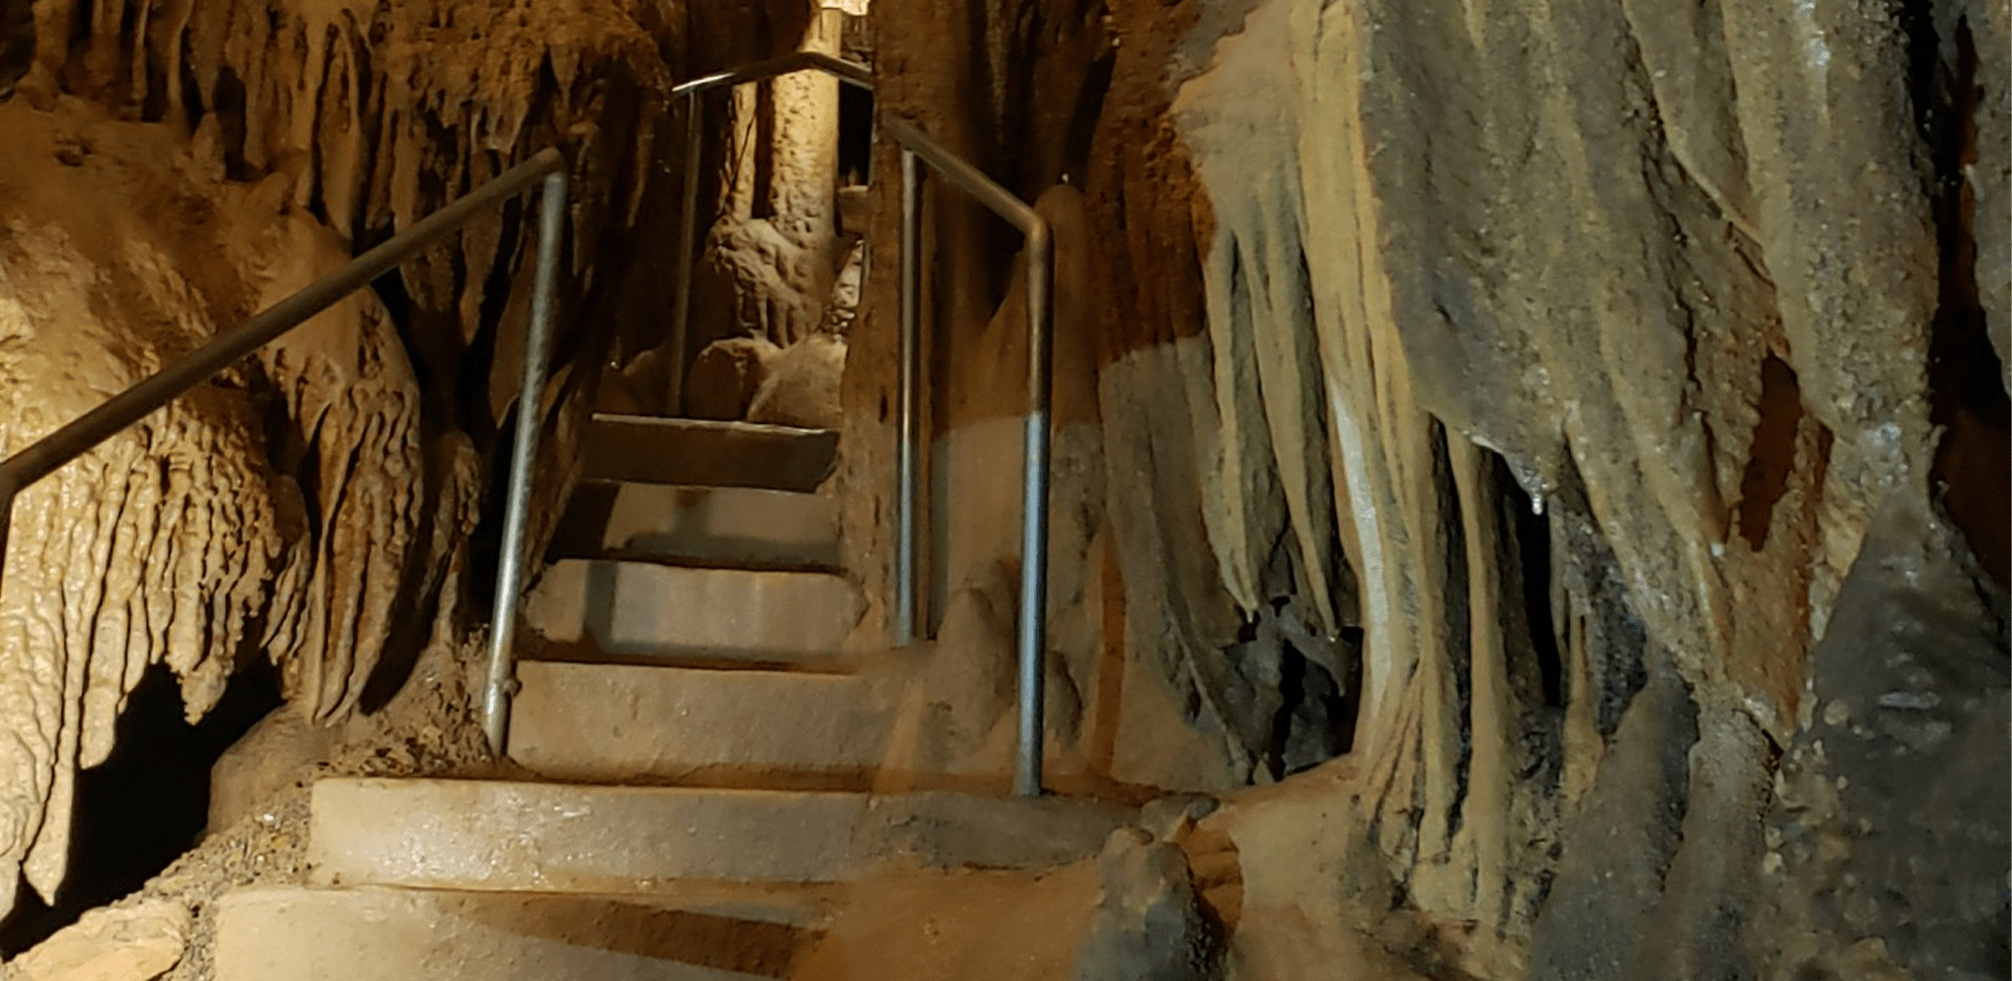 The inside of Crystal Onyx Cave, a neighbor to Mammoth Cave National Park